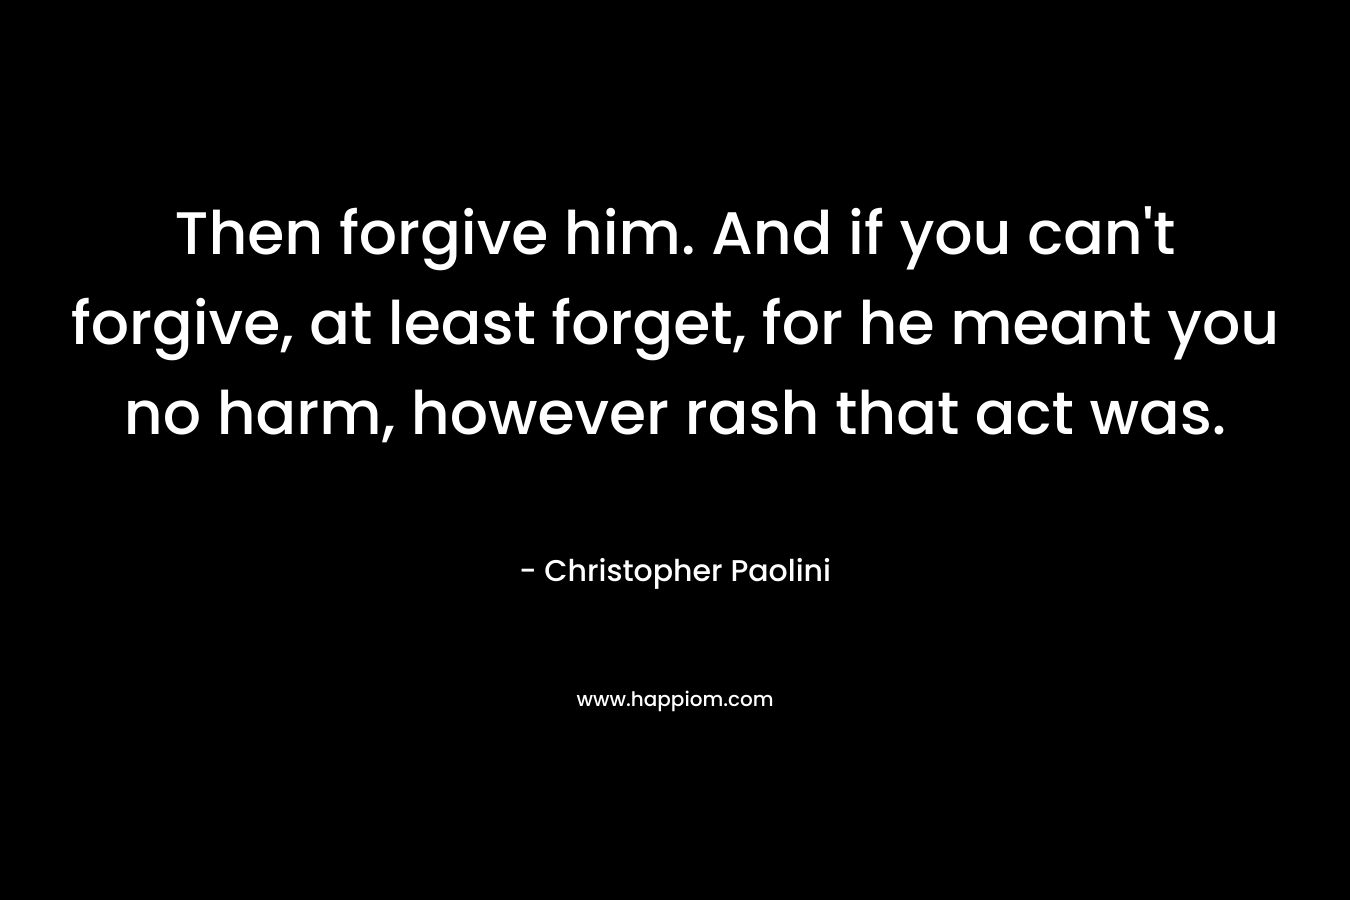 Then forgive him. And if you can't forgive, at least forget, for he meant you no harm, however rash that act was.